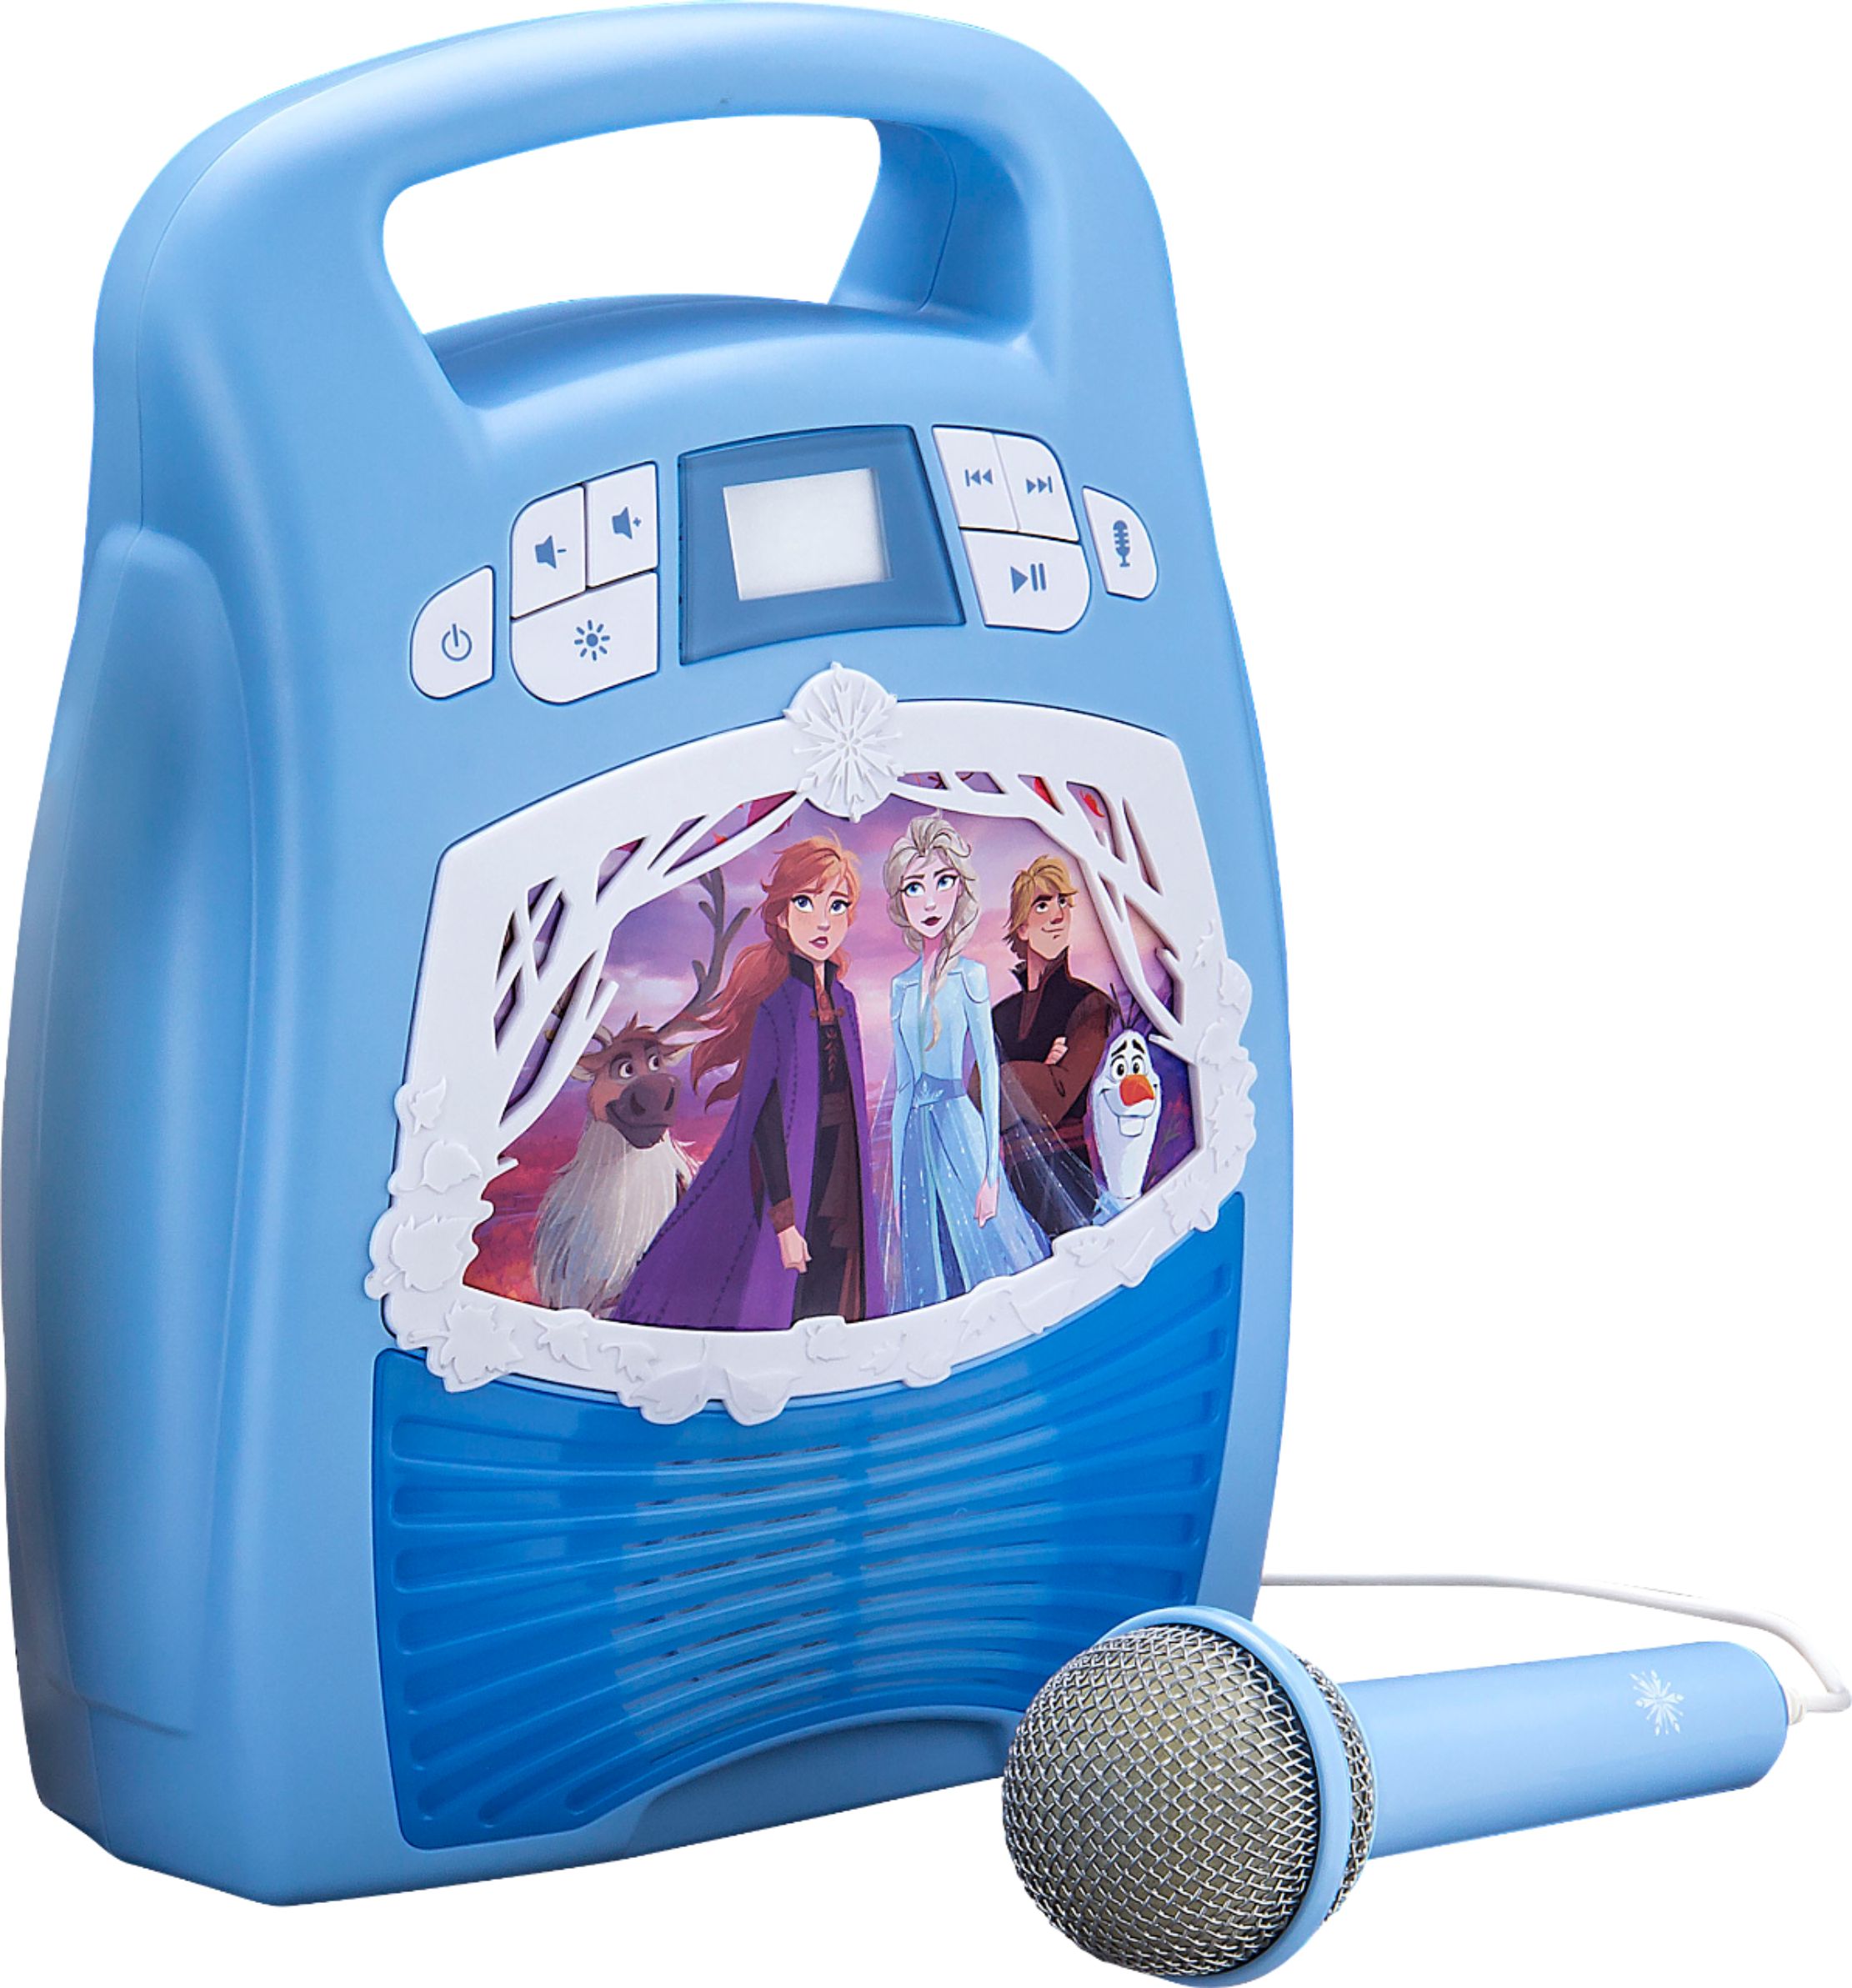 Angle View: Singing Machine Kids Superstar Singalong Karaoke Player with A Strap for Carrying, SMK198, White